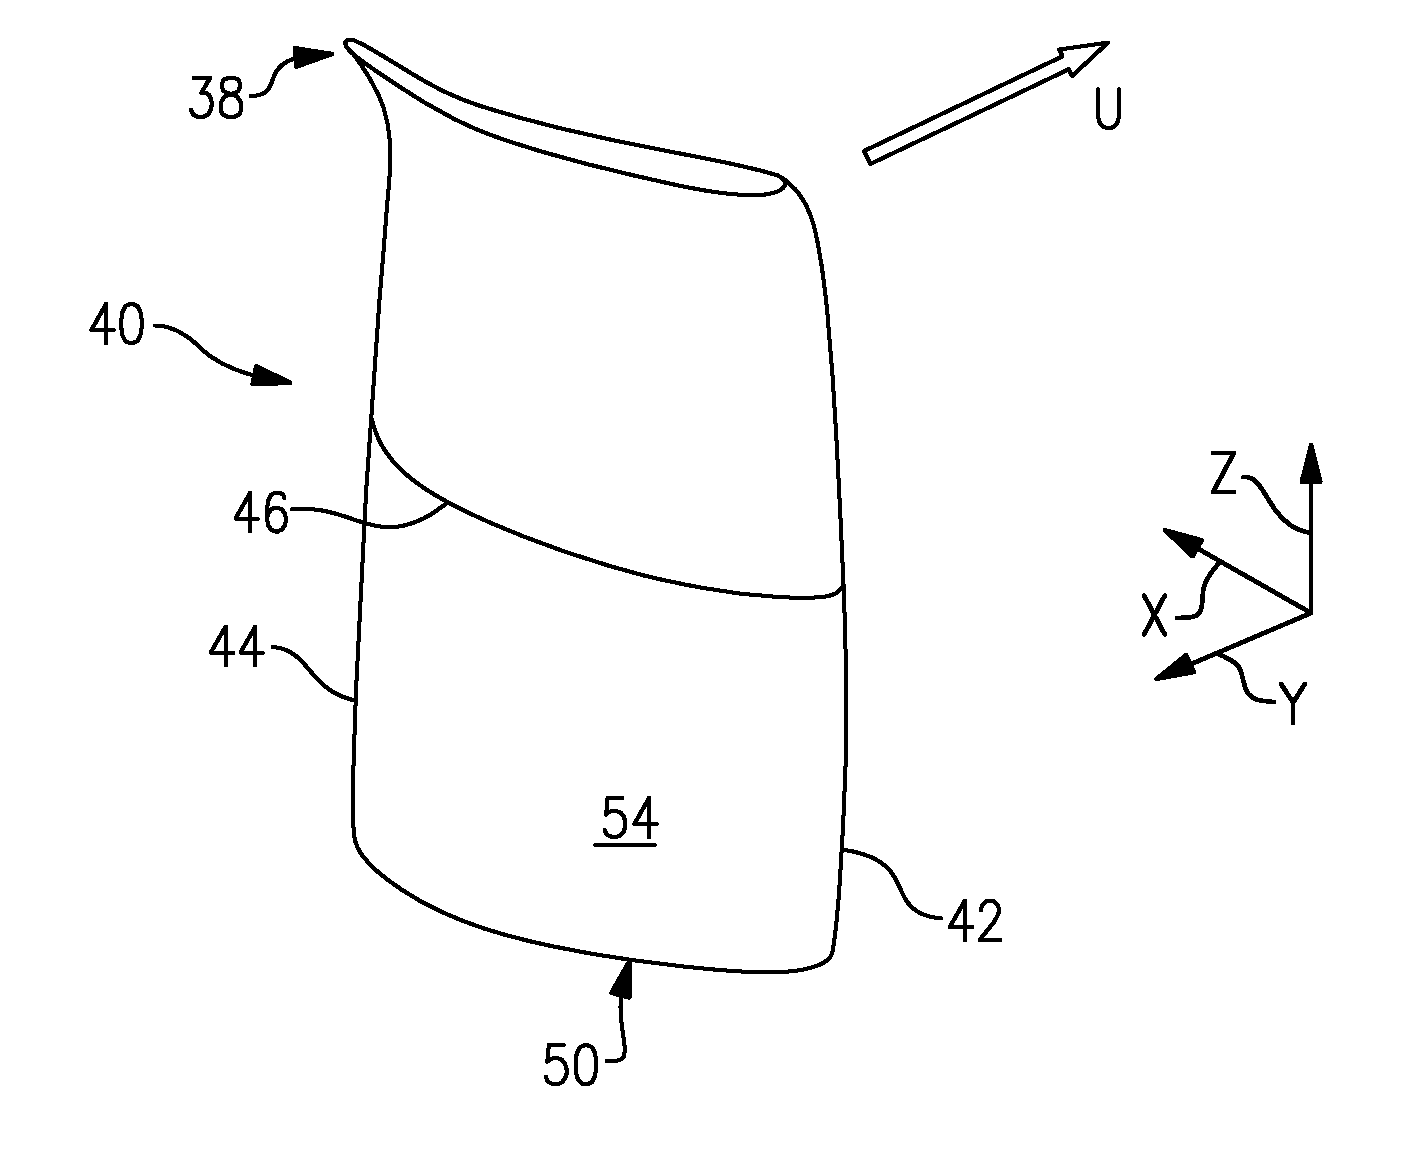 High order shaped curve region for an airfoil